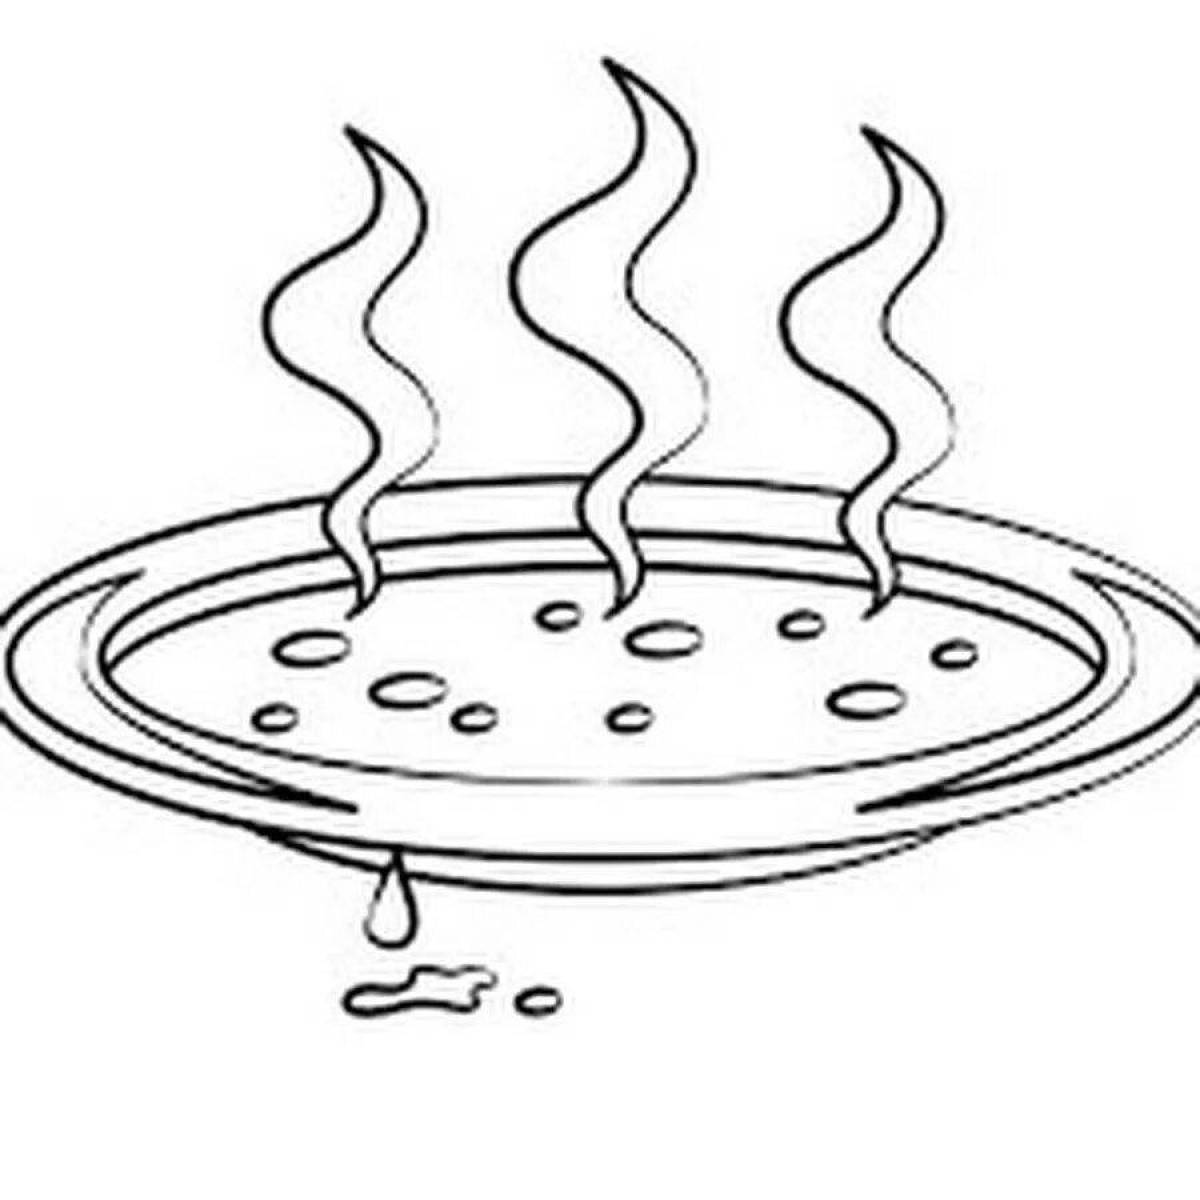 Playful soup plate coloring page